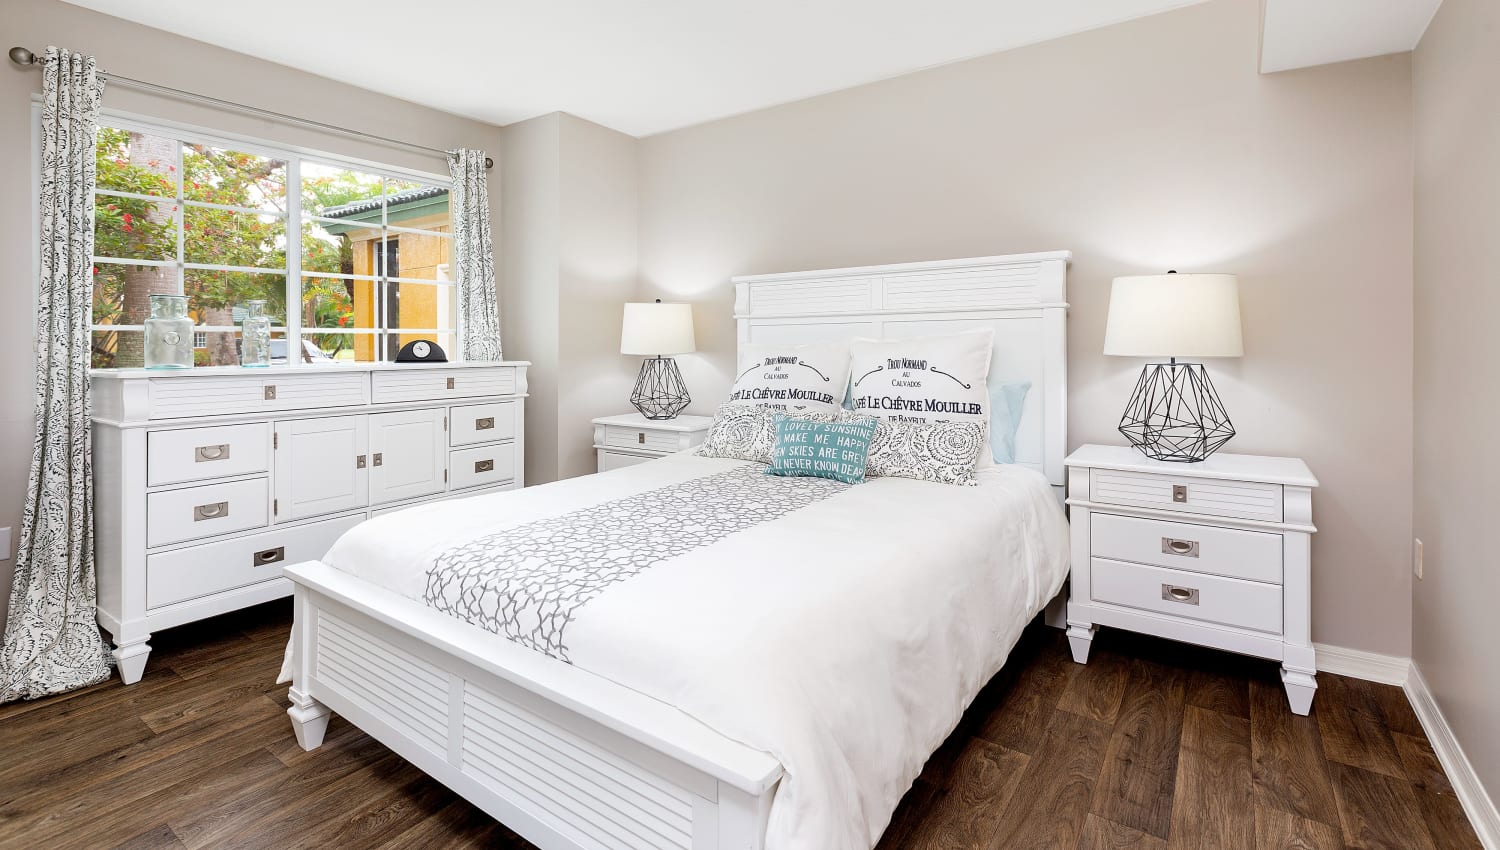 Beautifully decorated bedroom at Weston Place Apartments in Weston, Florida